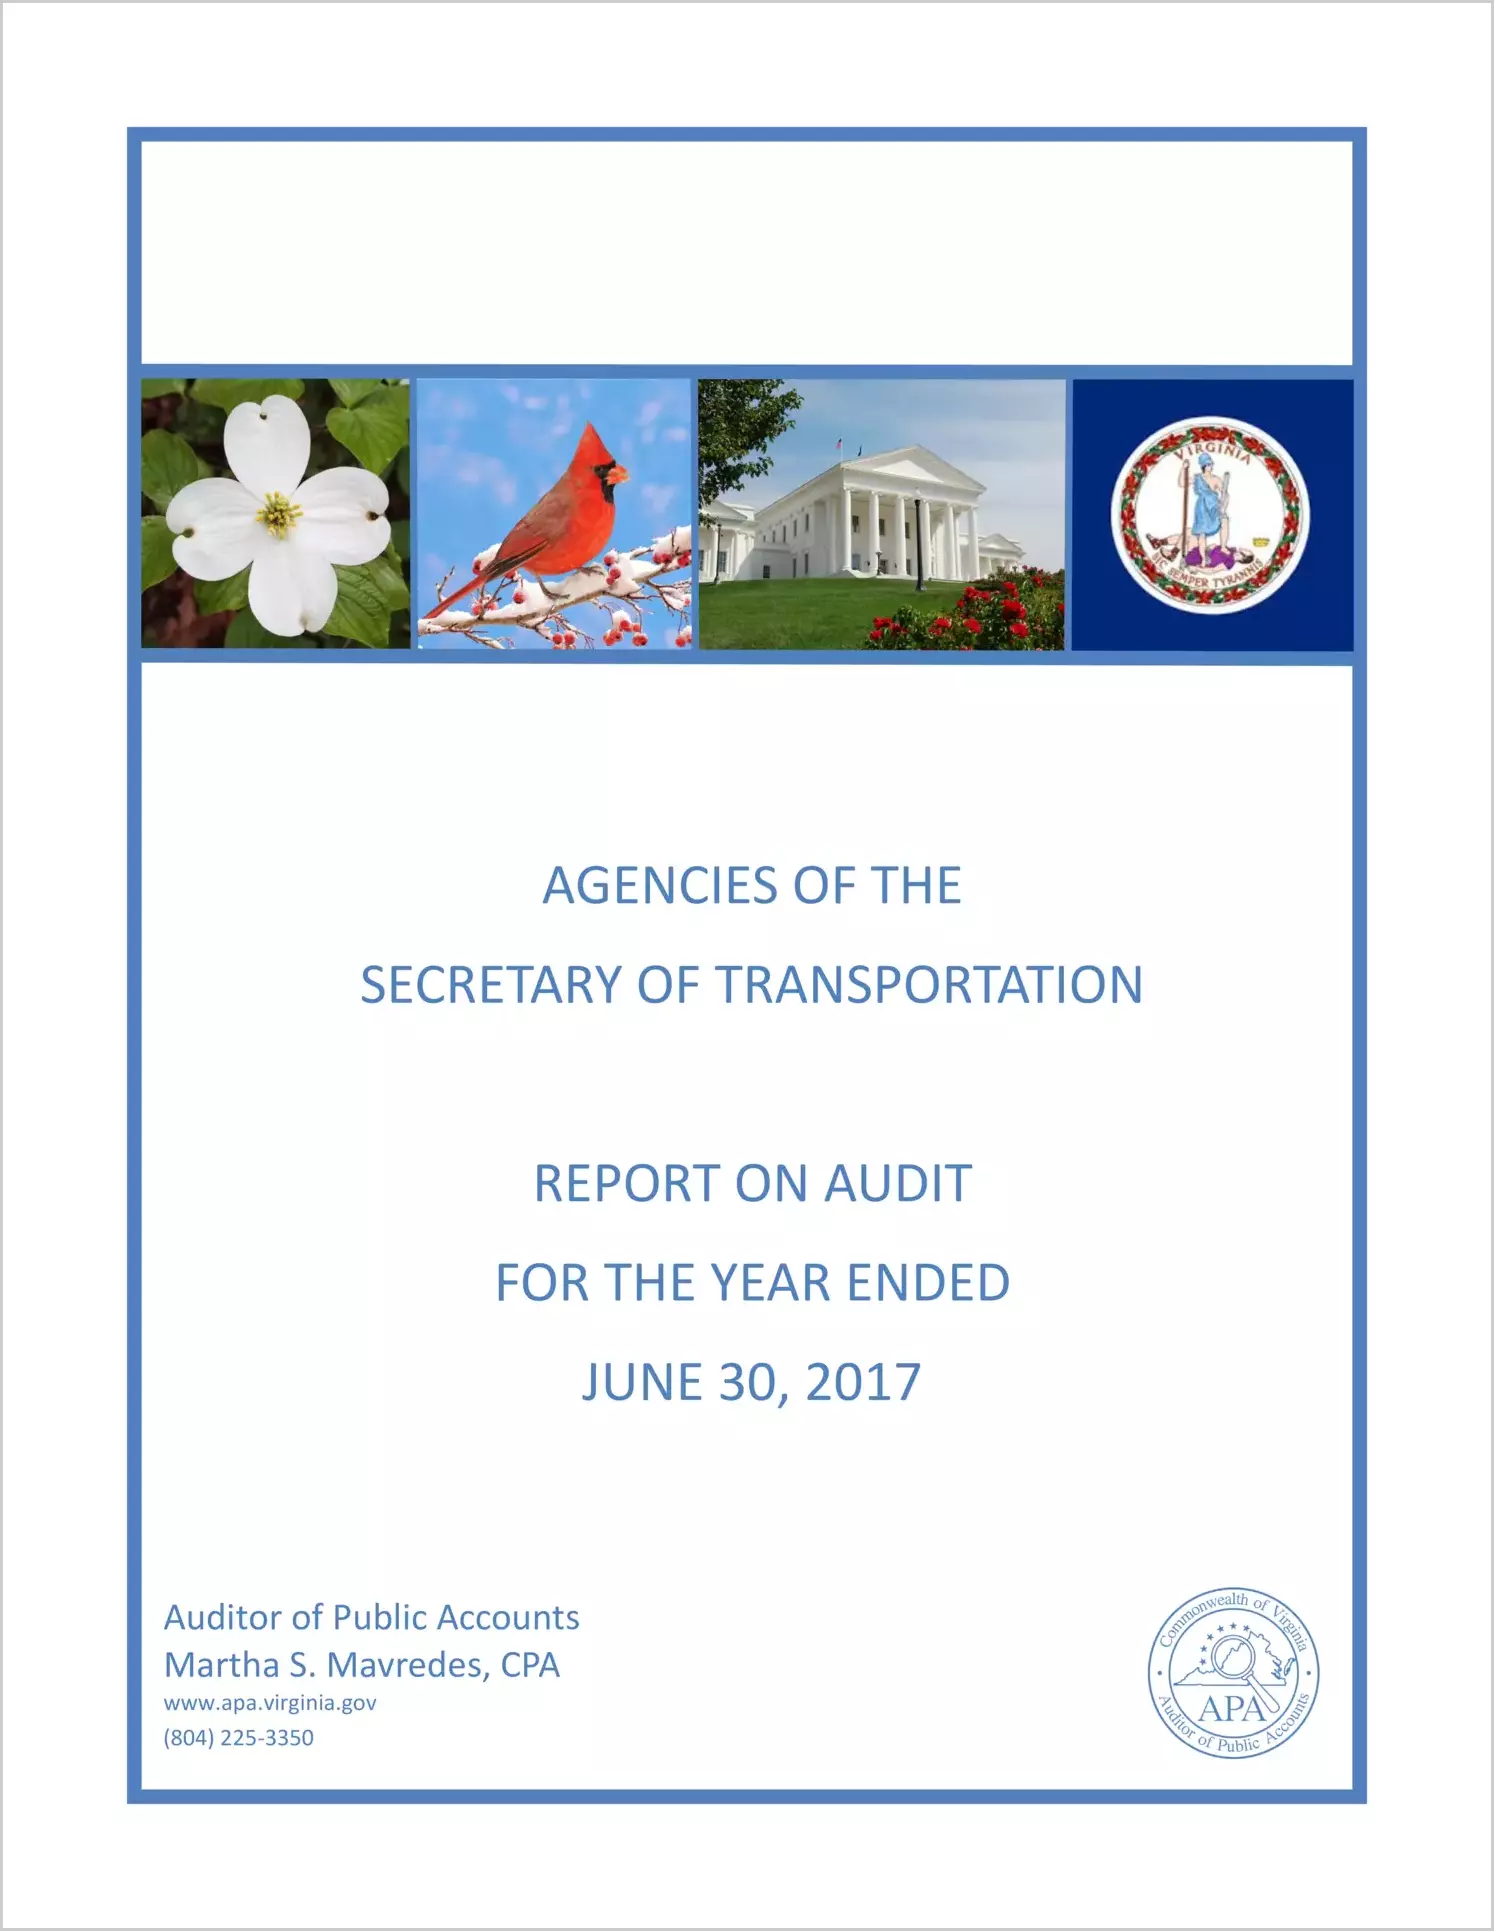 Agencies of the Secretary of Transportation for the year ended June 30, 2017